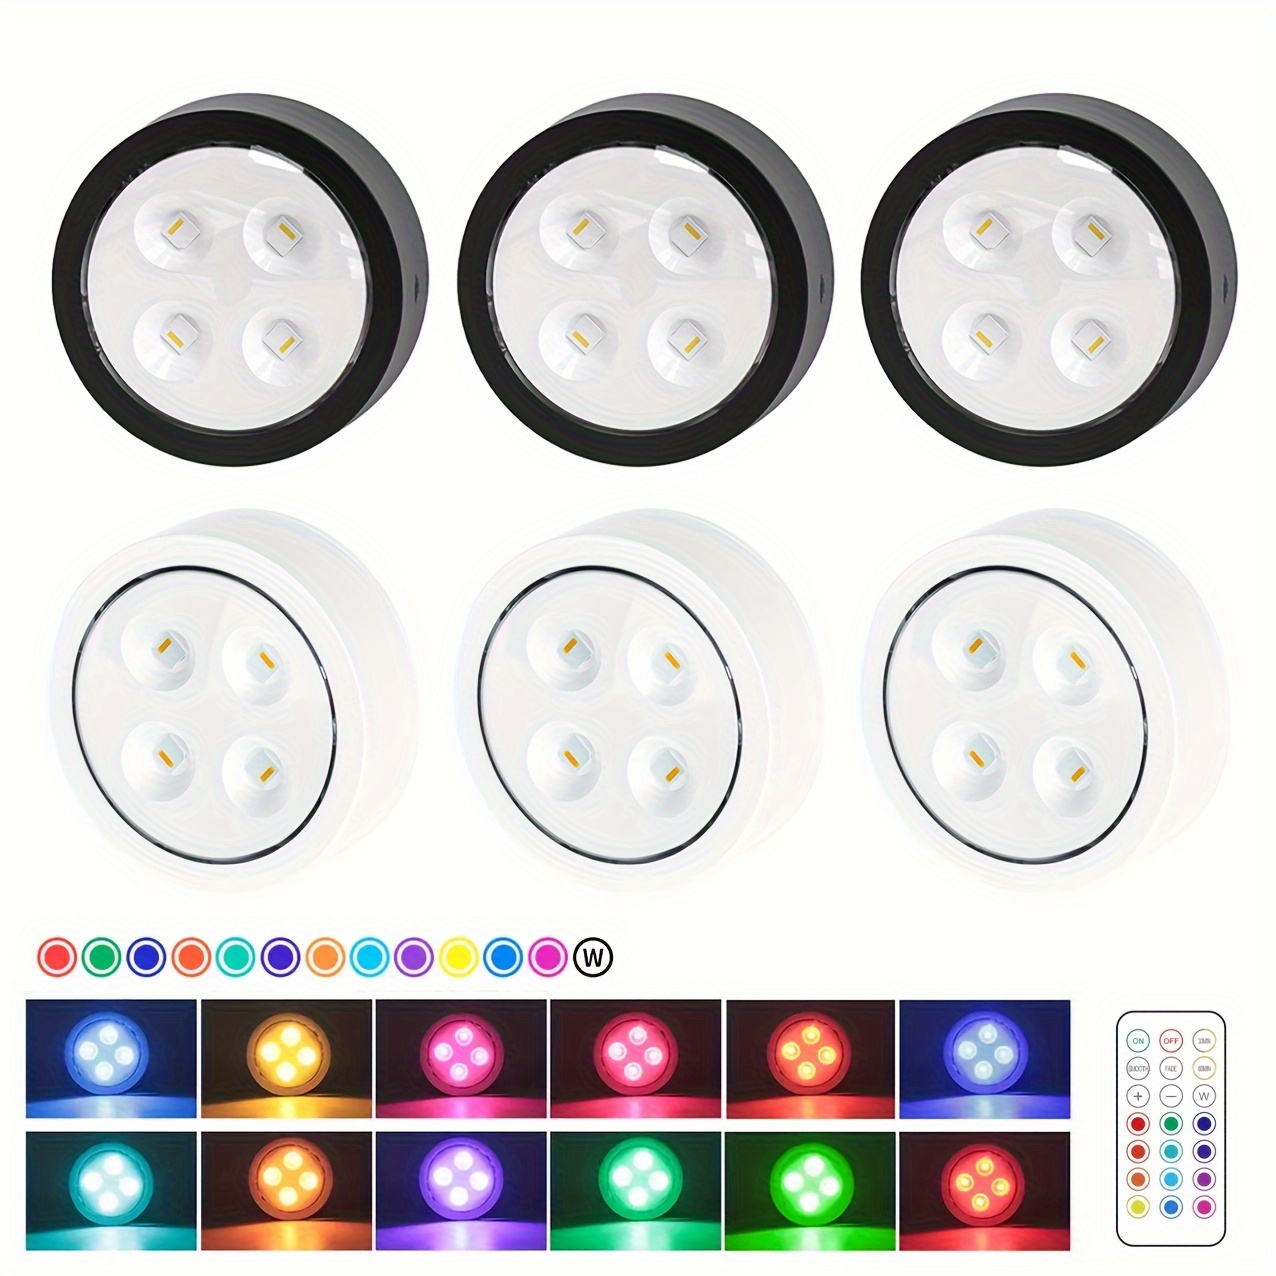 

1/3/6pcs Led Round Night Light Rgb 13 Colors Wireless Cabinet Light With Remote And Touch Control Led Spotlight, Cabinet Light Battery Operated For Closet, Bedroom Wall, Cabinet, Walkway